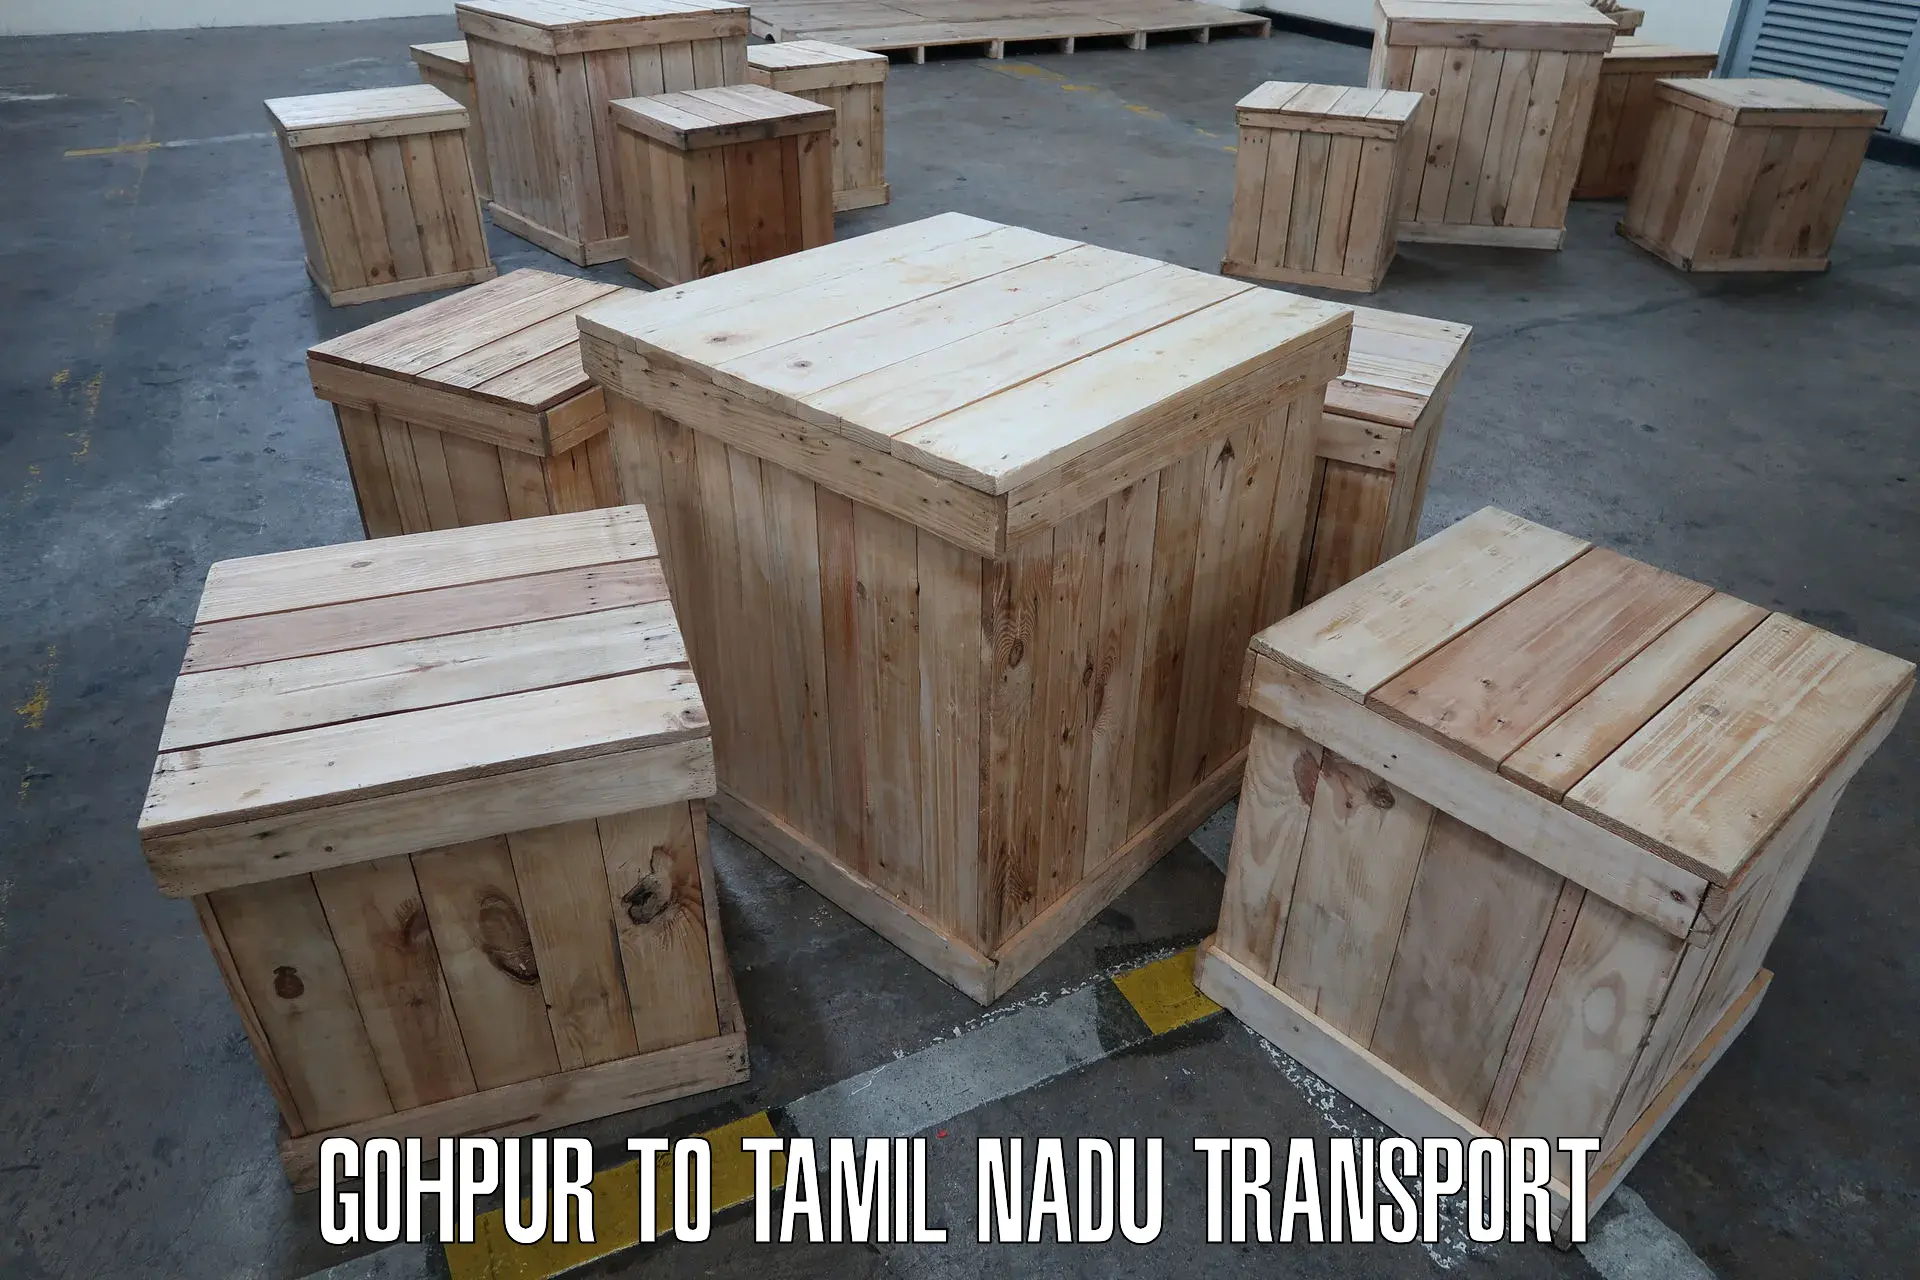 Goods transport services Gohpur to Ennore Port Chennai